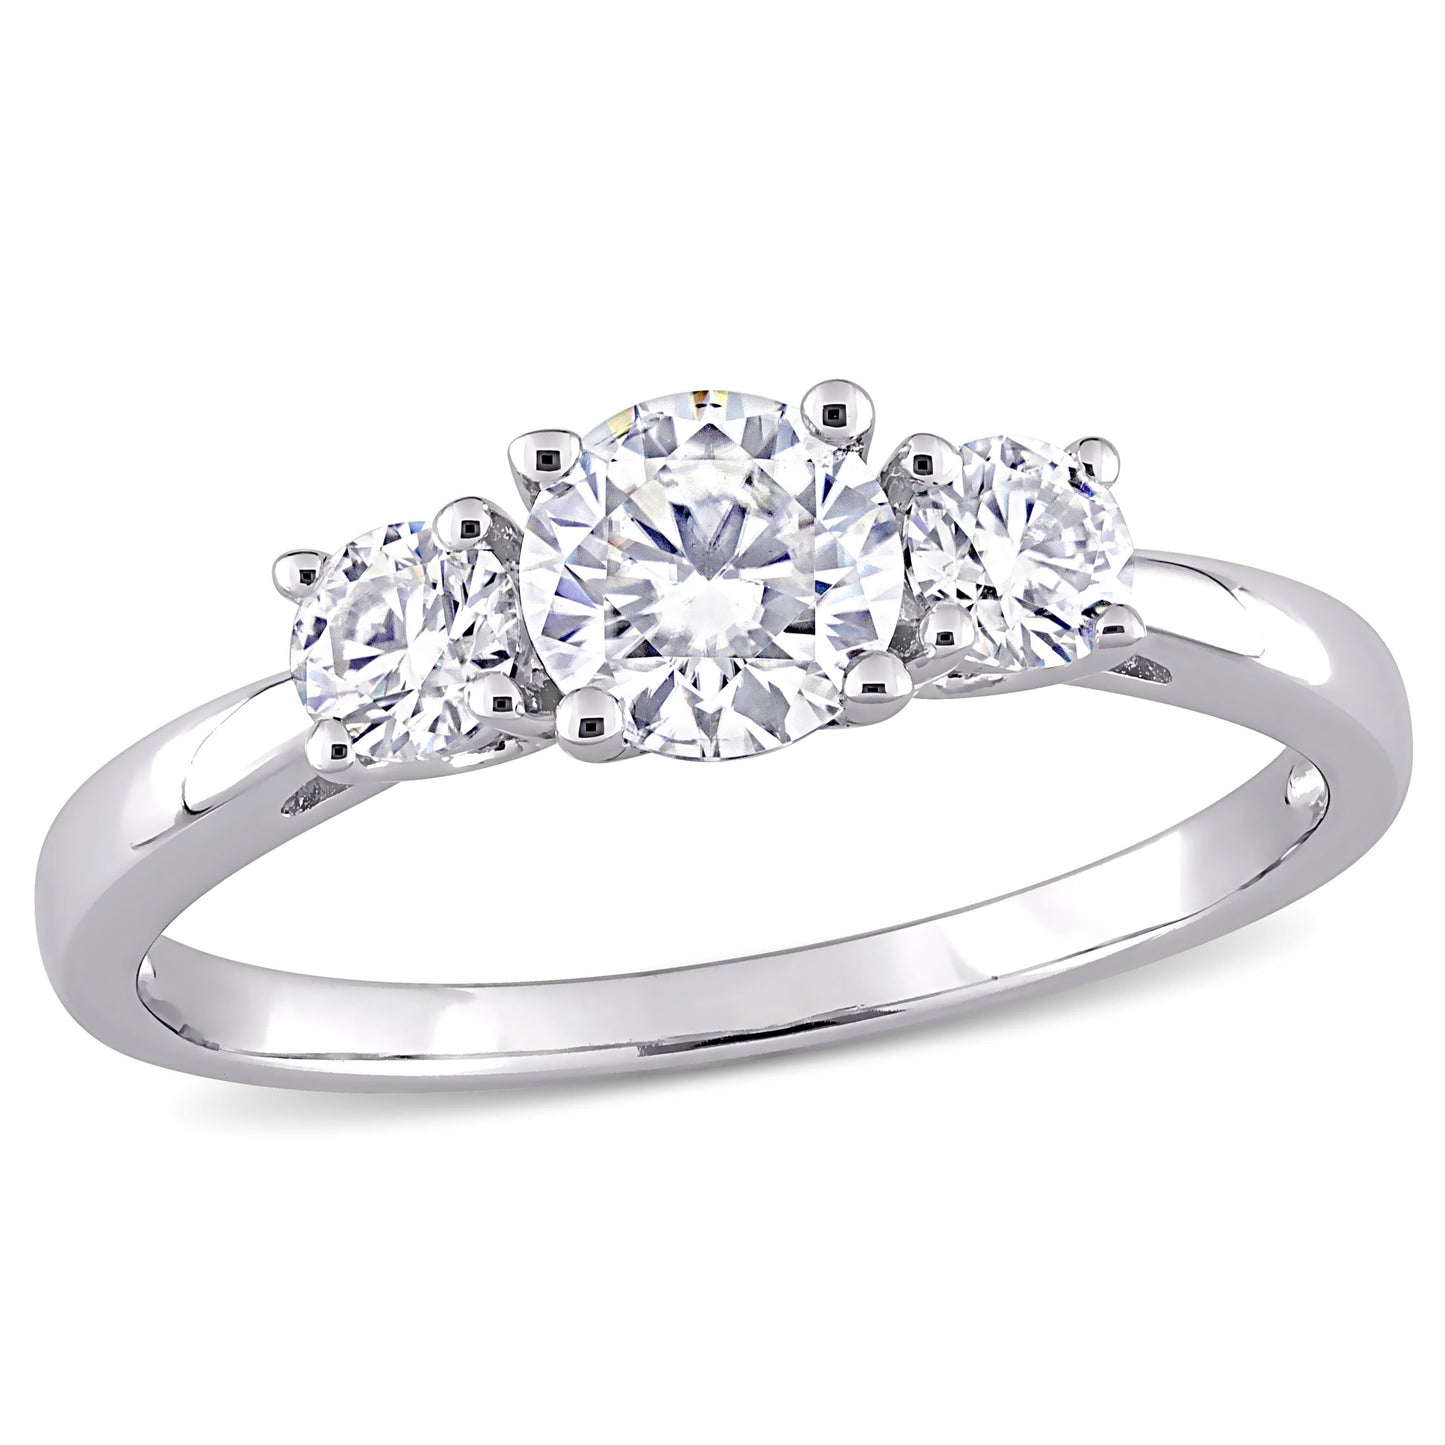 1ct Three Stone Moissanite Ring in Sterling Silver